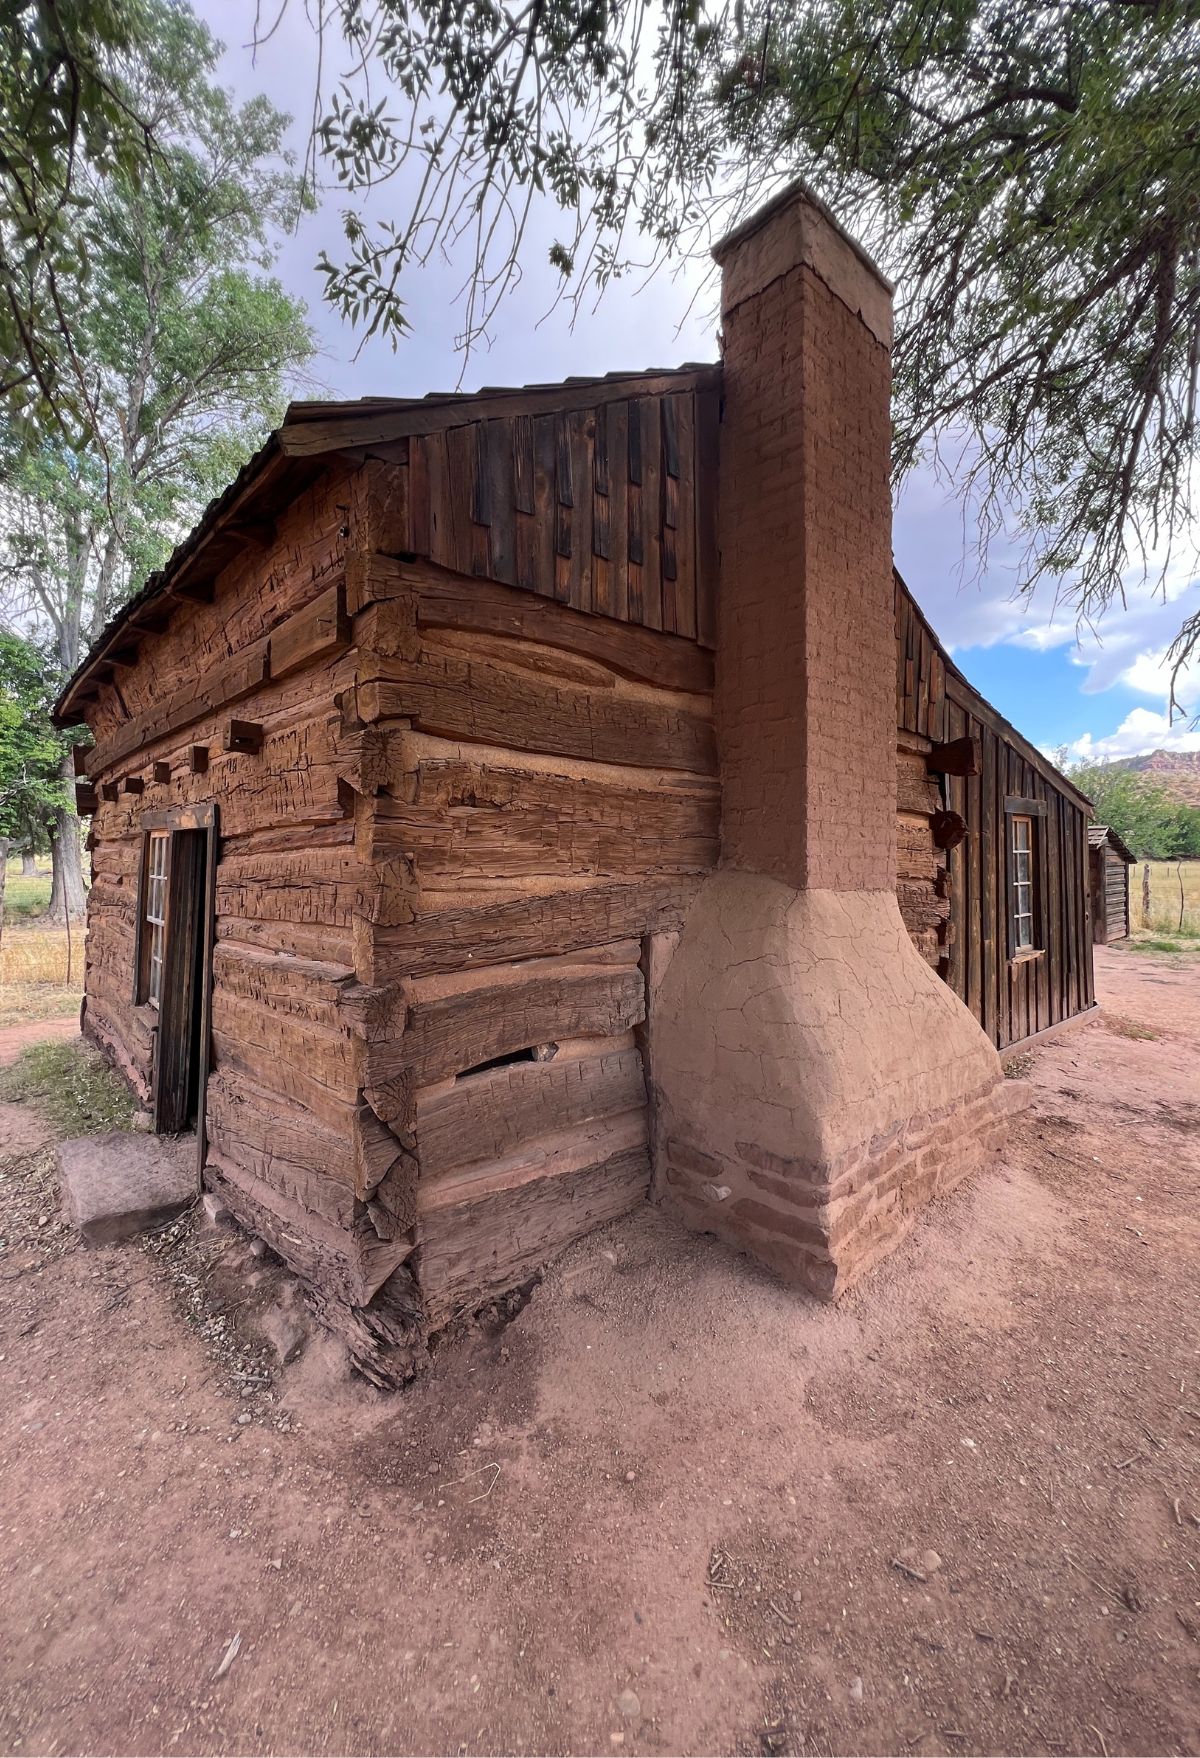 A log cabin with a chimney in the middle of the desert.